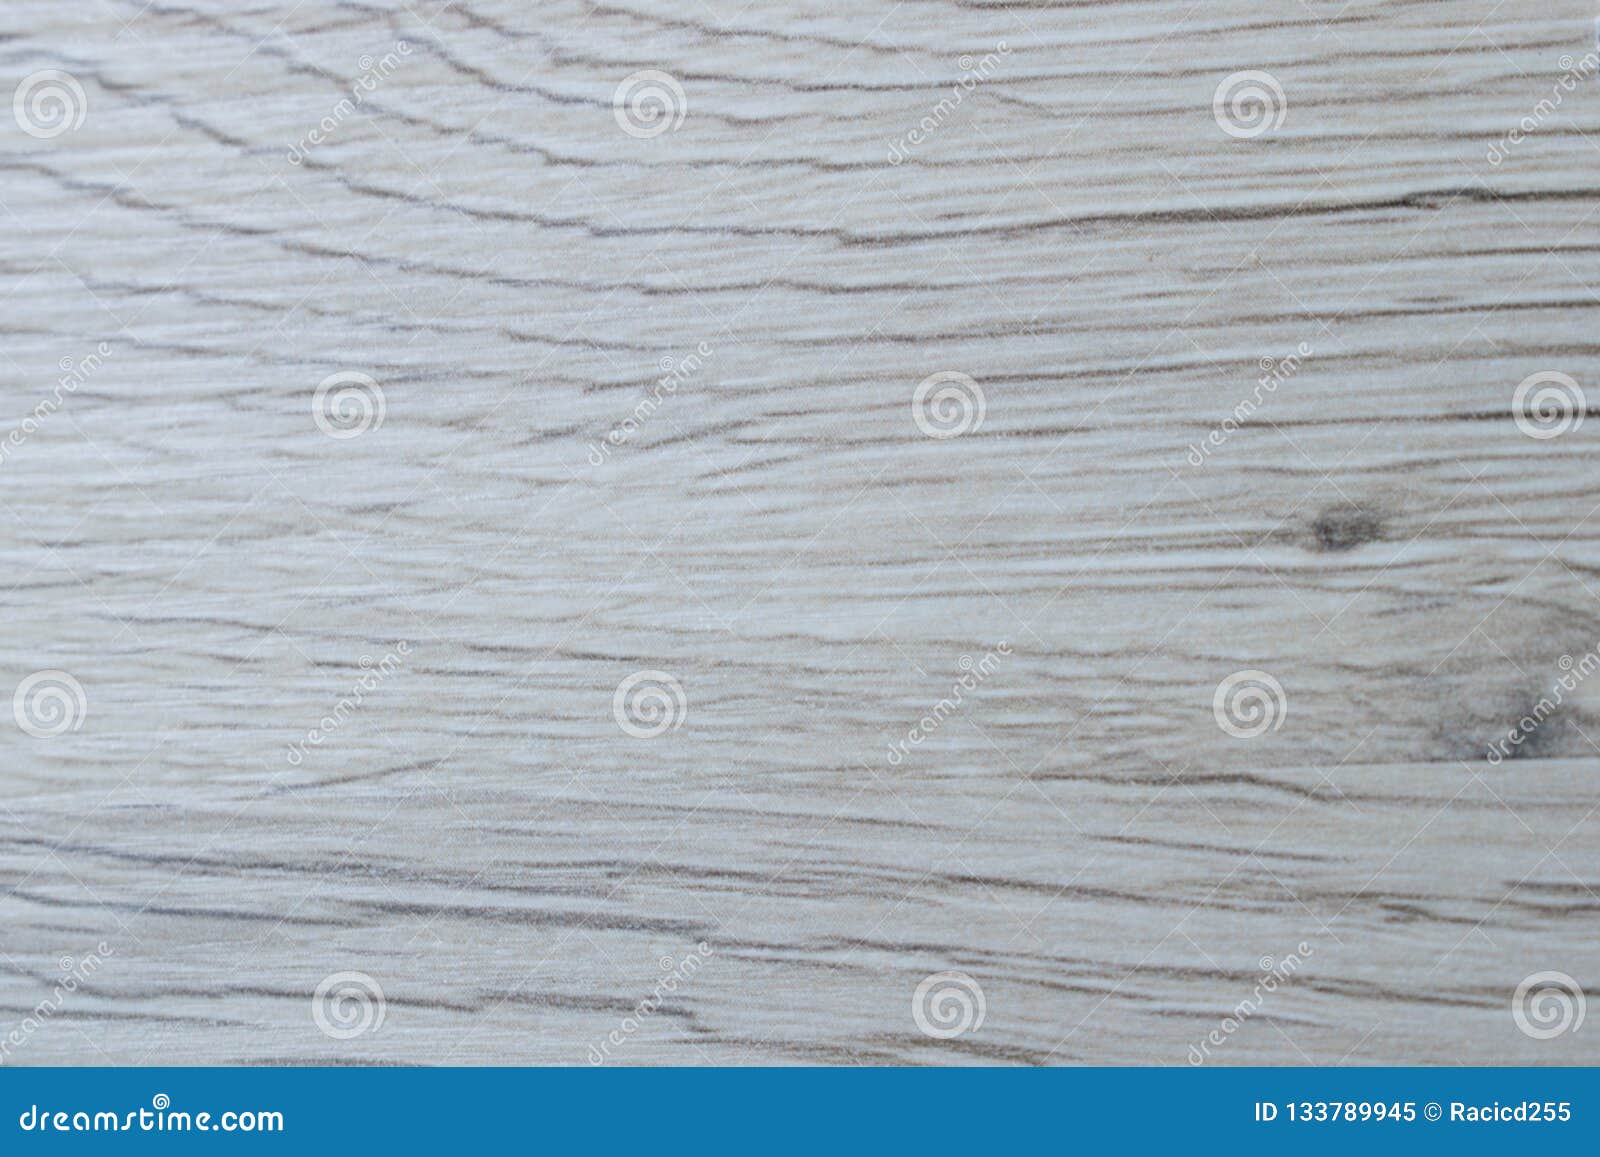 wood texture background. material, decorative.